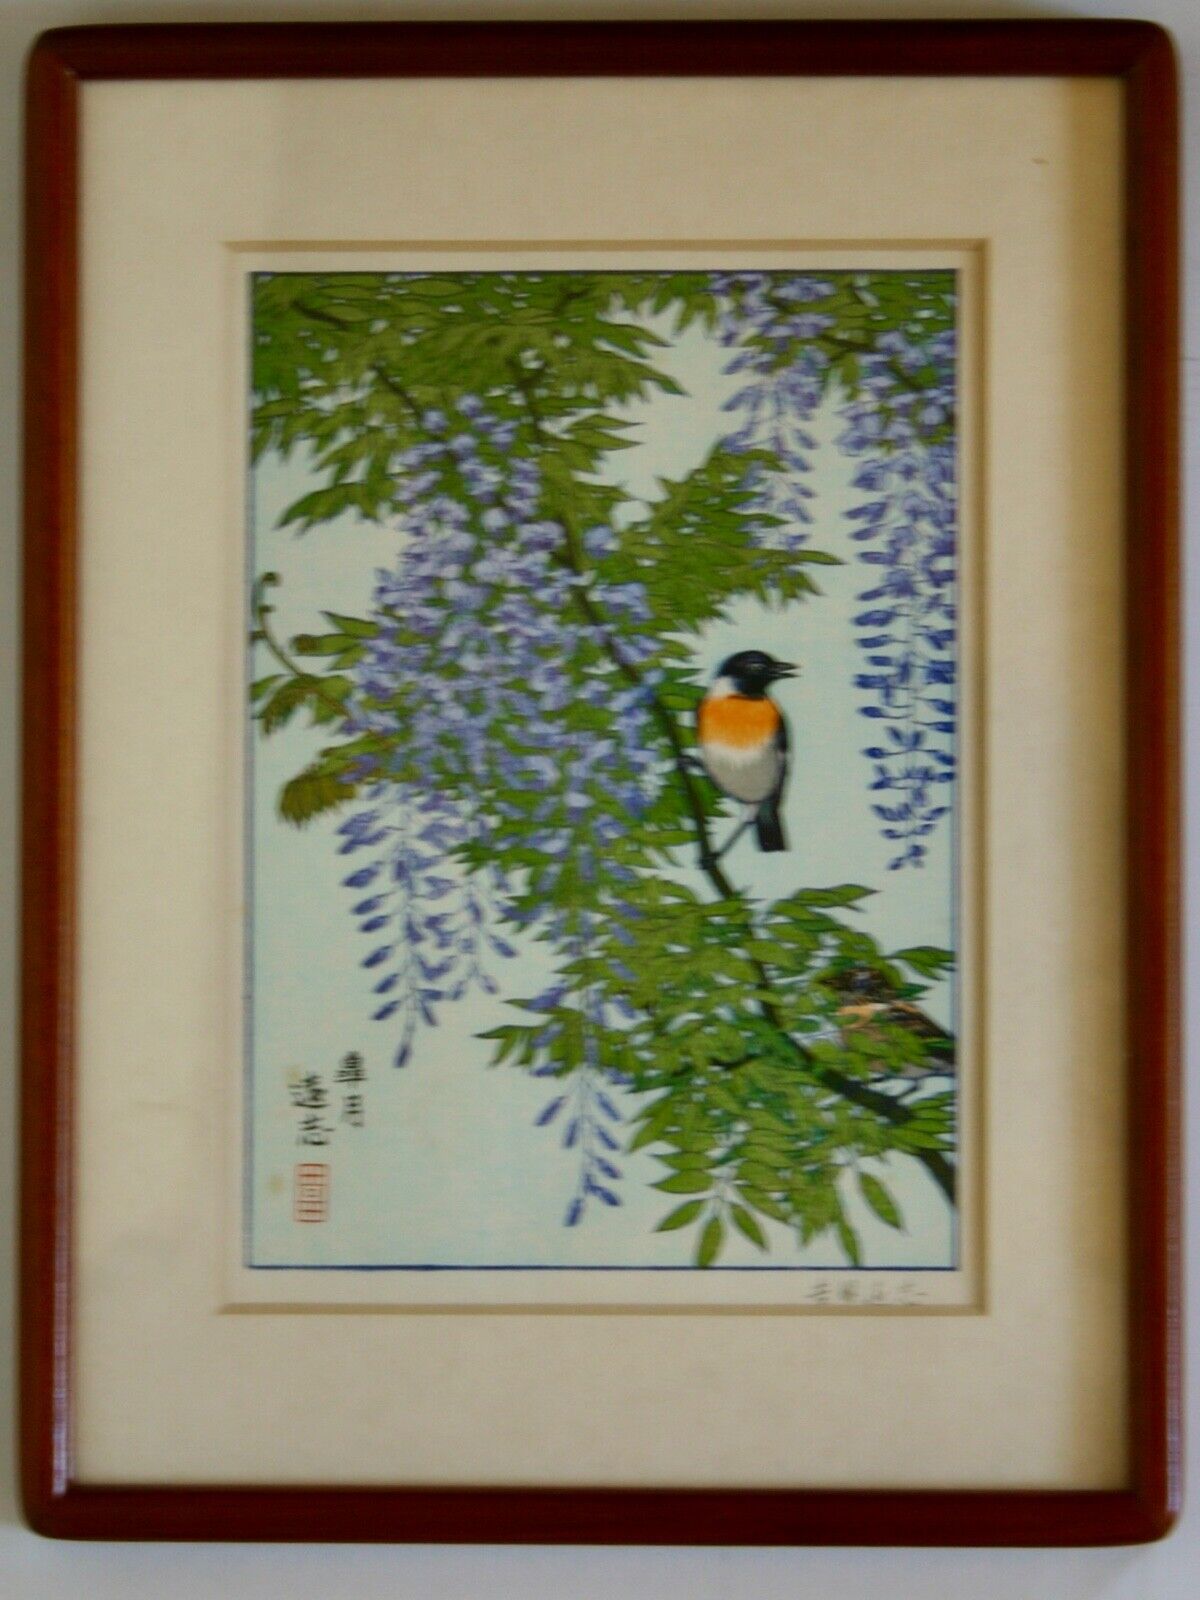 Toshi Yoshida original woodblock print in framed with signature and certificate